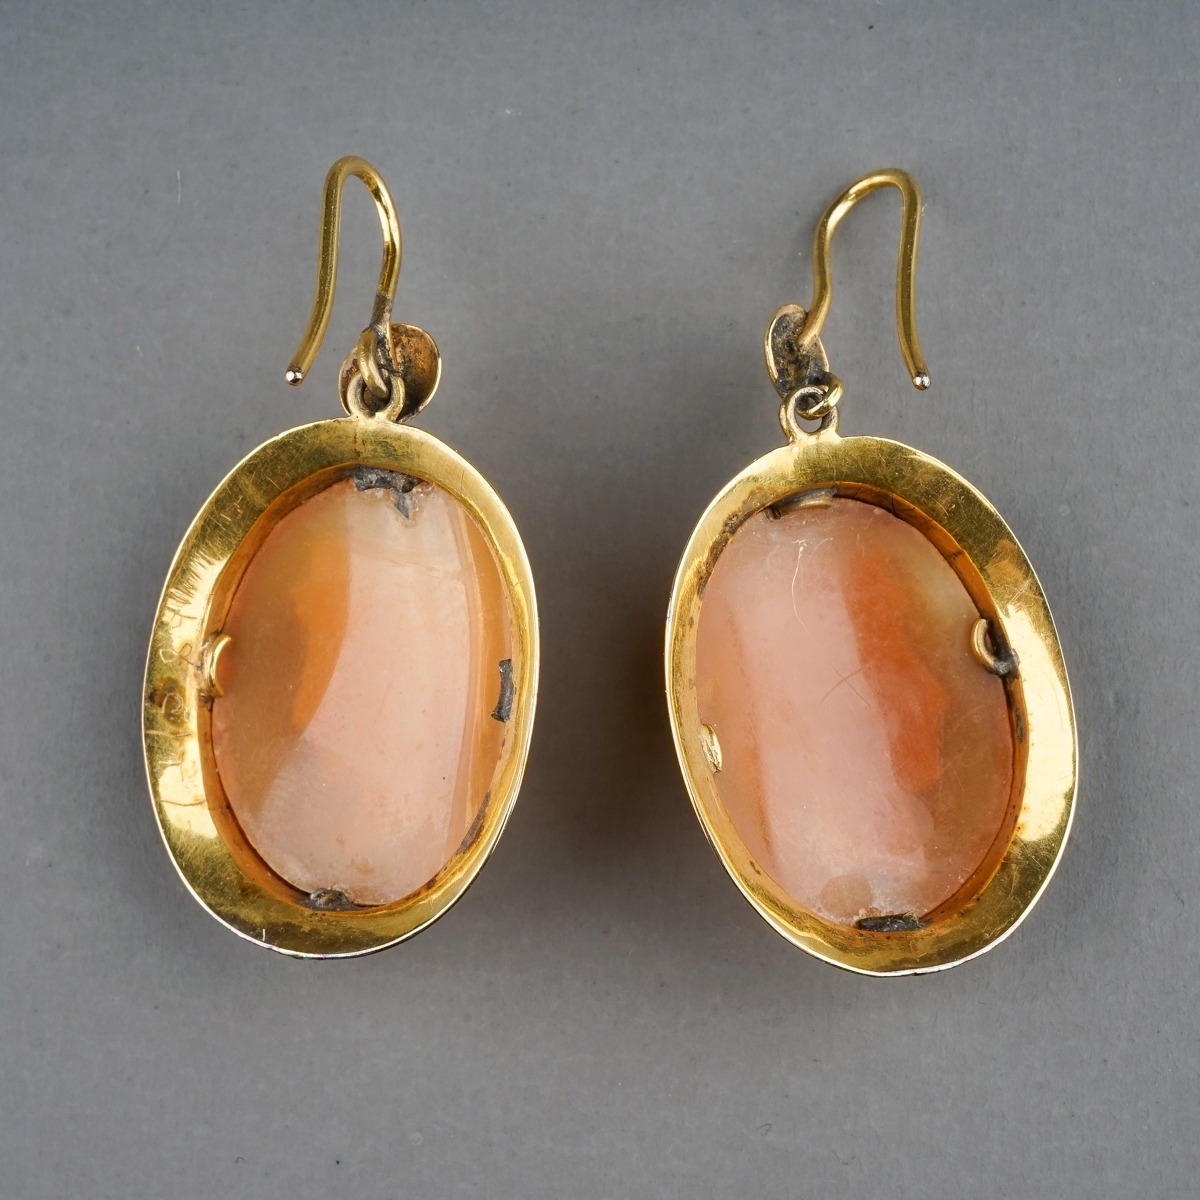 A pair of 19th century yellow gold and cameo earrings, set with shell cameos carved depicting - Image 3 of 3